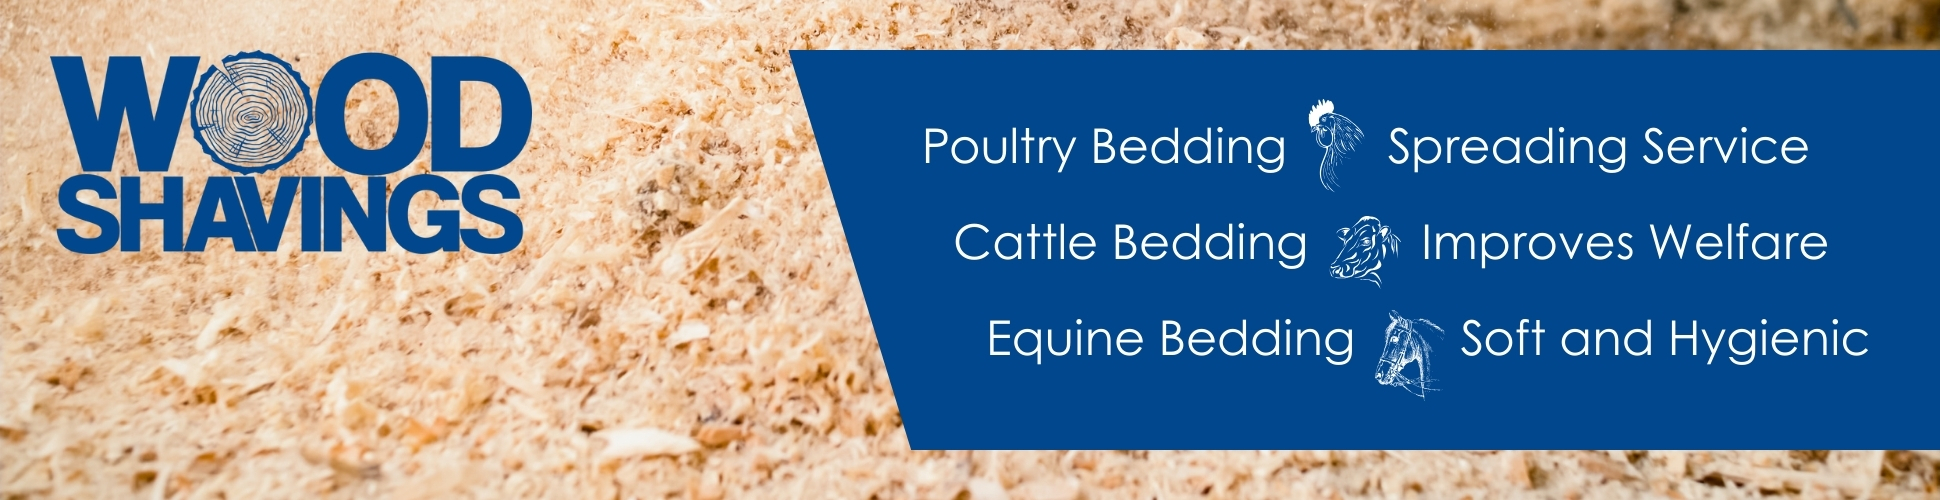 The benefits of wood shavings as livestock and poultry bedding